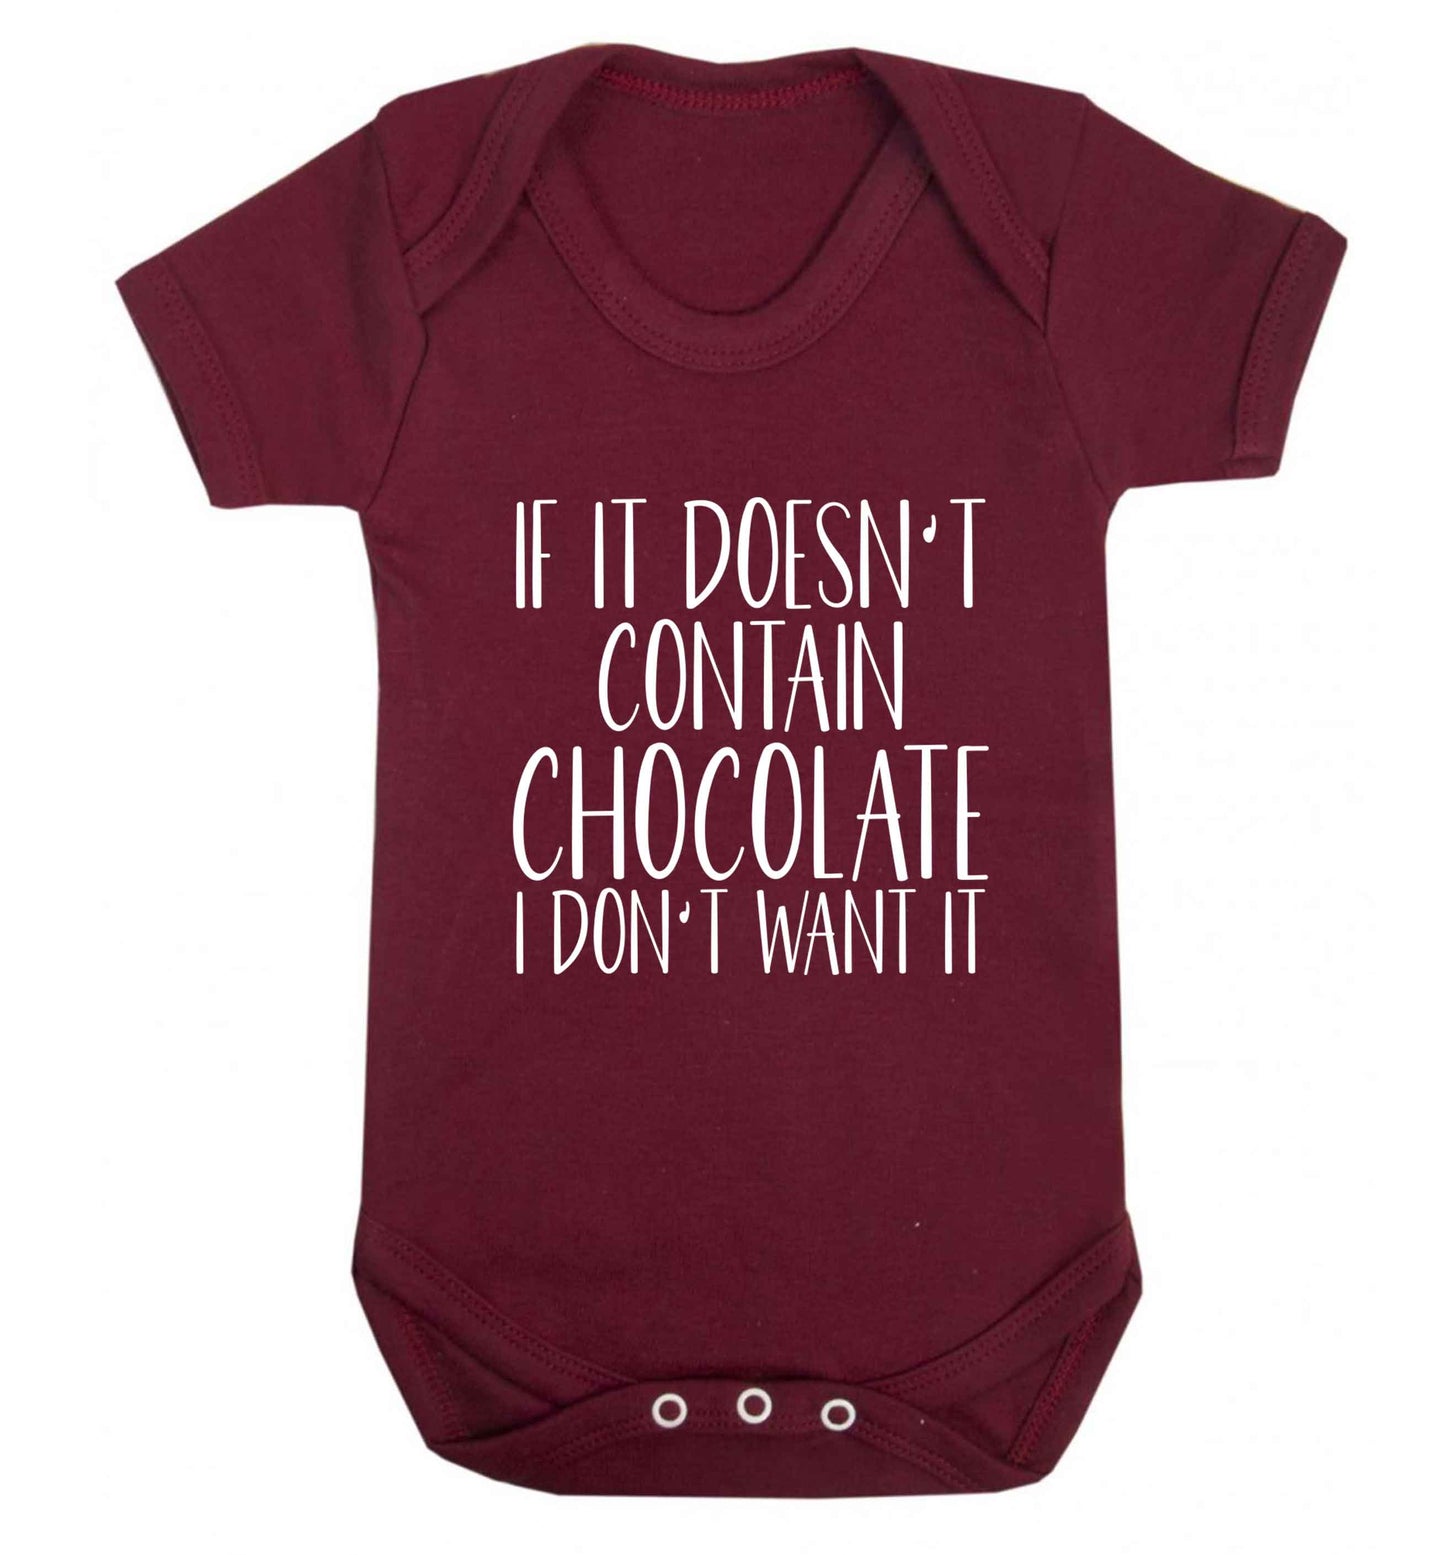 If it doesn't contain chocolate I don't want it baby vest maroon 18-24 months